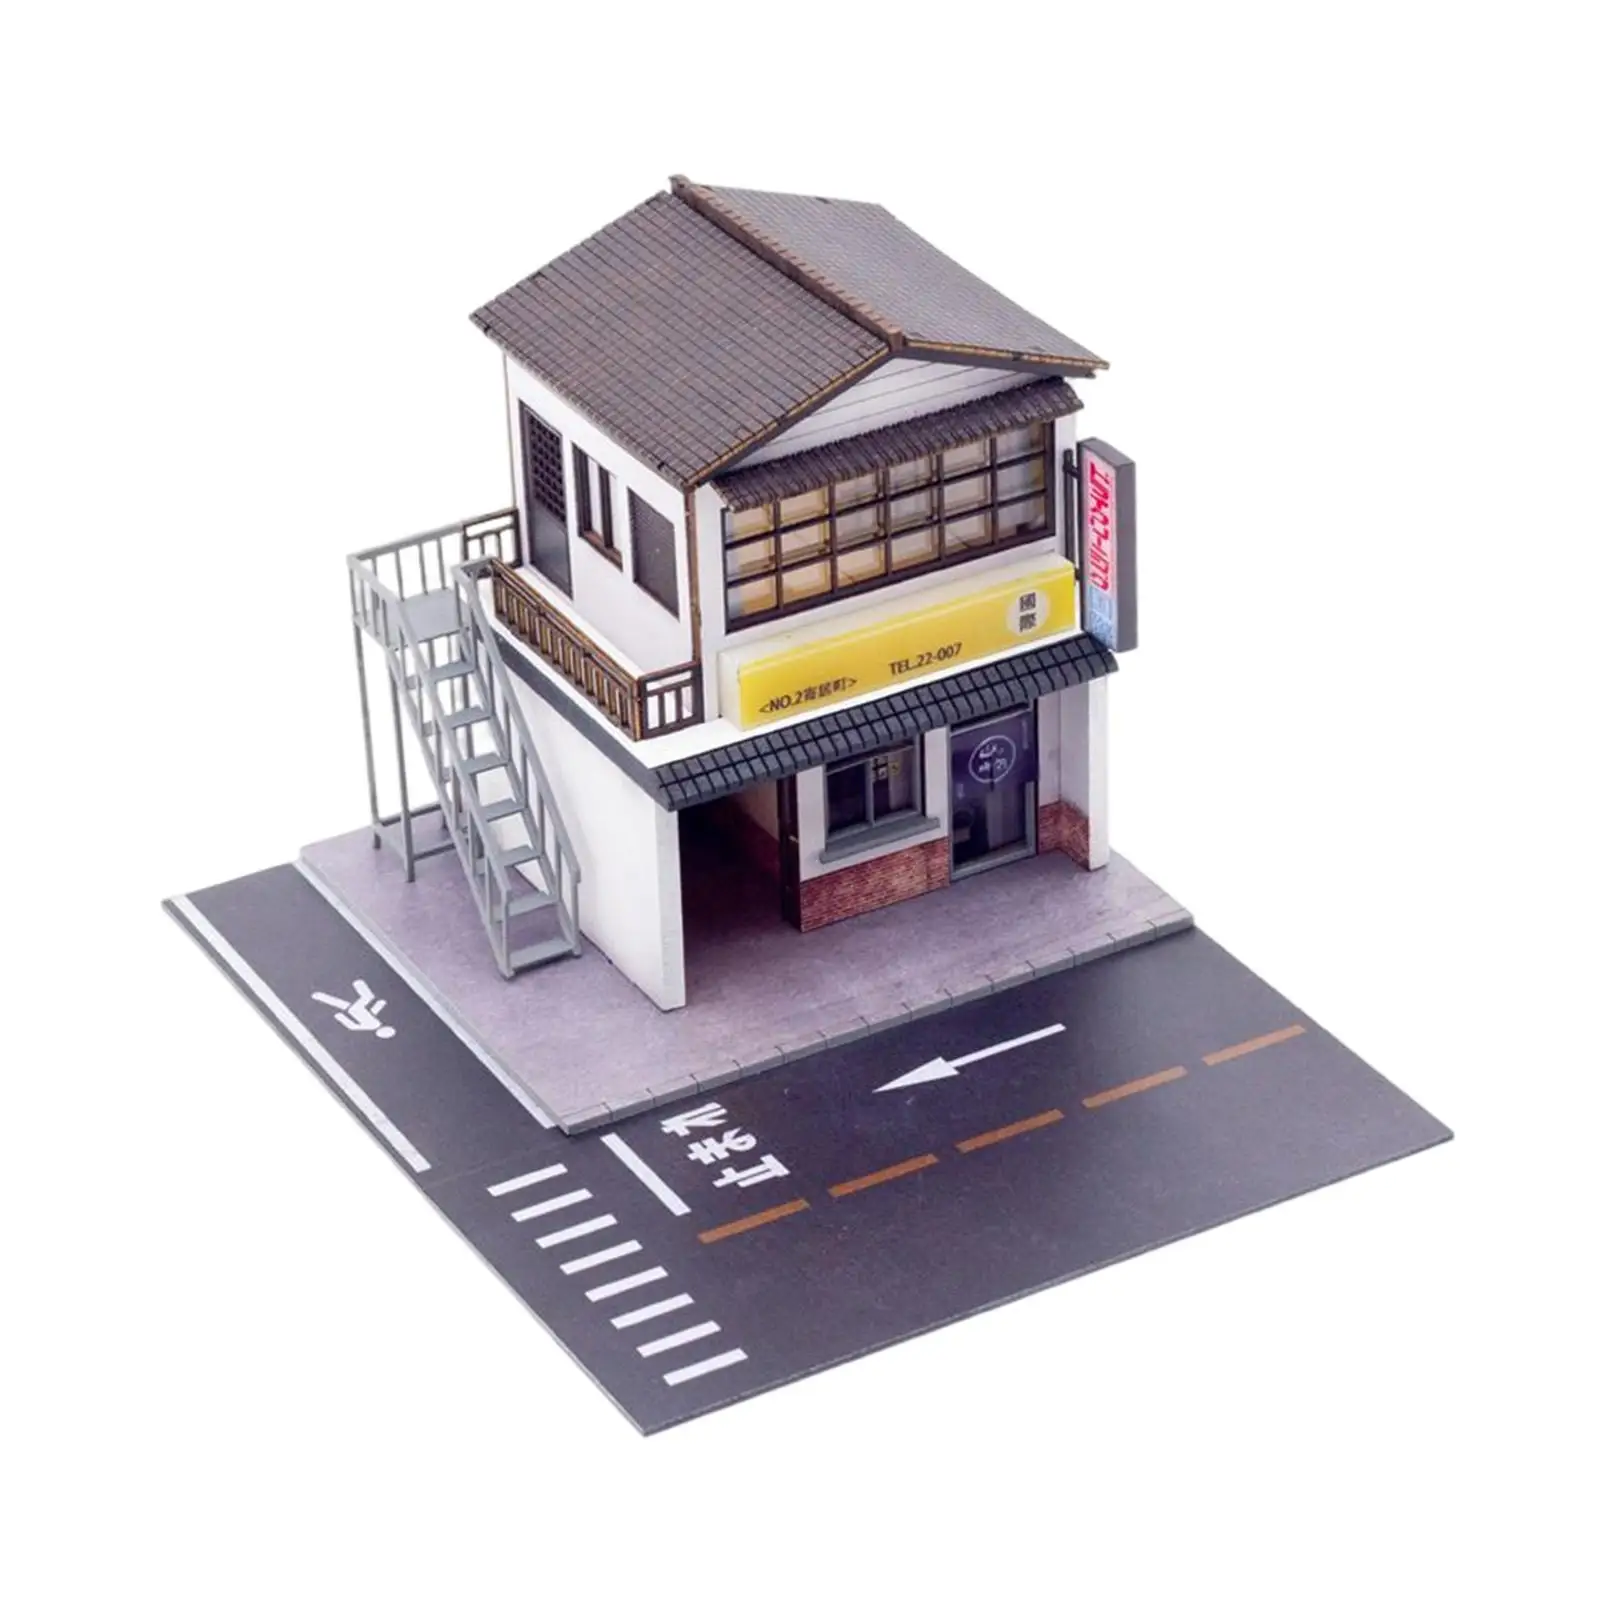 Miniature 1/64 Dry Cleaners Diorama Scene Toy Collection Gifts Sand Table Layout City DIY Model Home Office Desktop Ornament